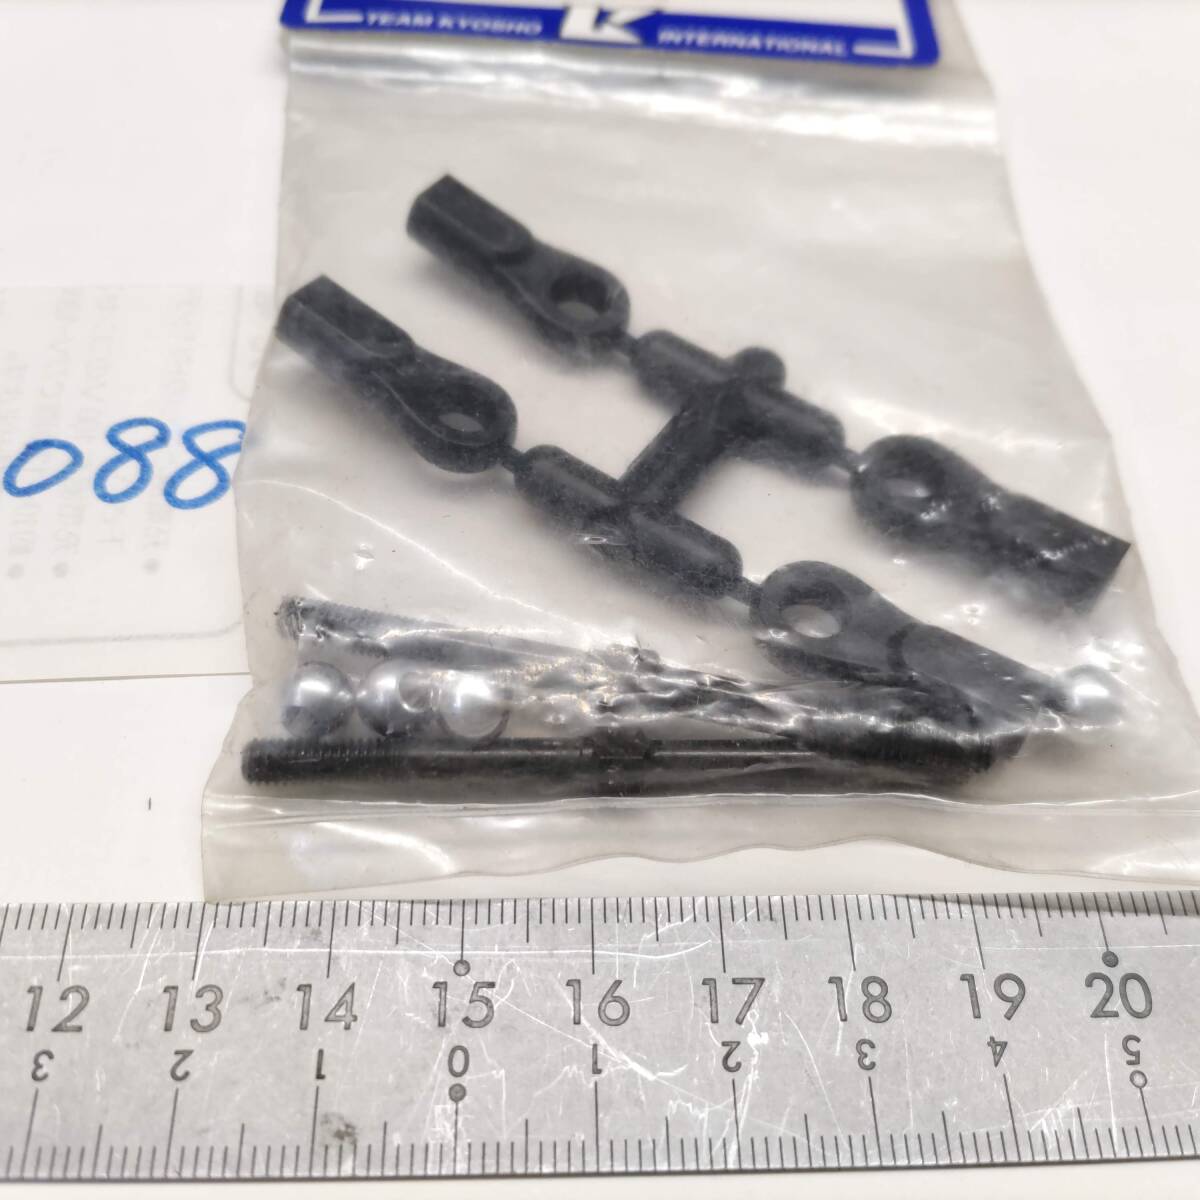 S088　KYOSHO 京商　BSW35 タイロッドSP　Special tie rod　未開封 長期保管品_画像3